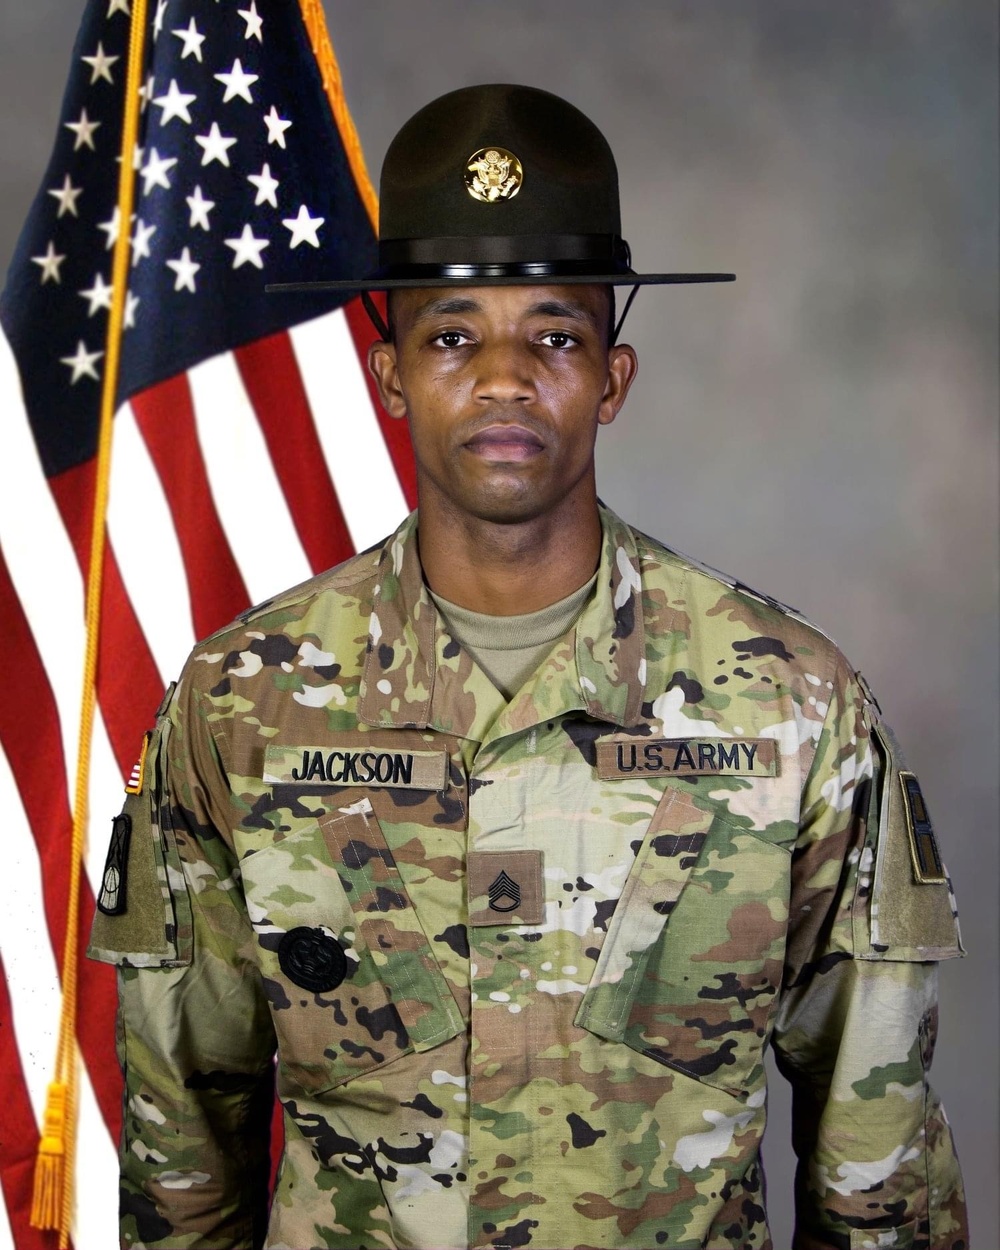 Drill sergeant trail next chapter for First Army NCO